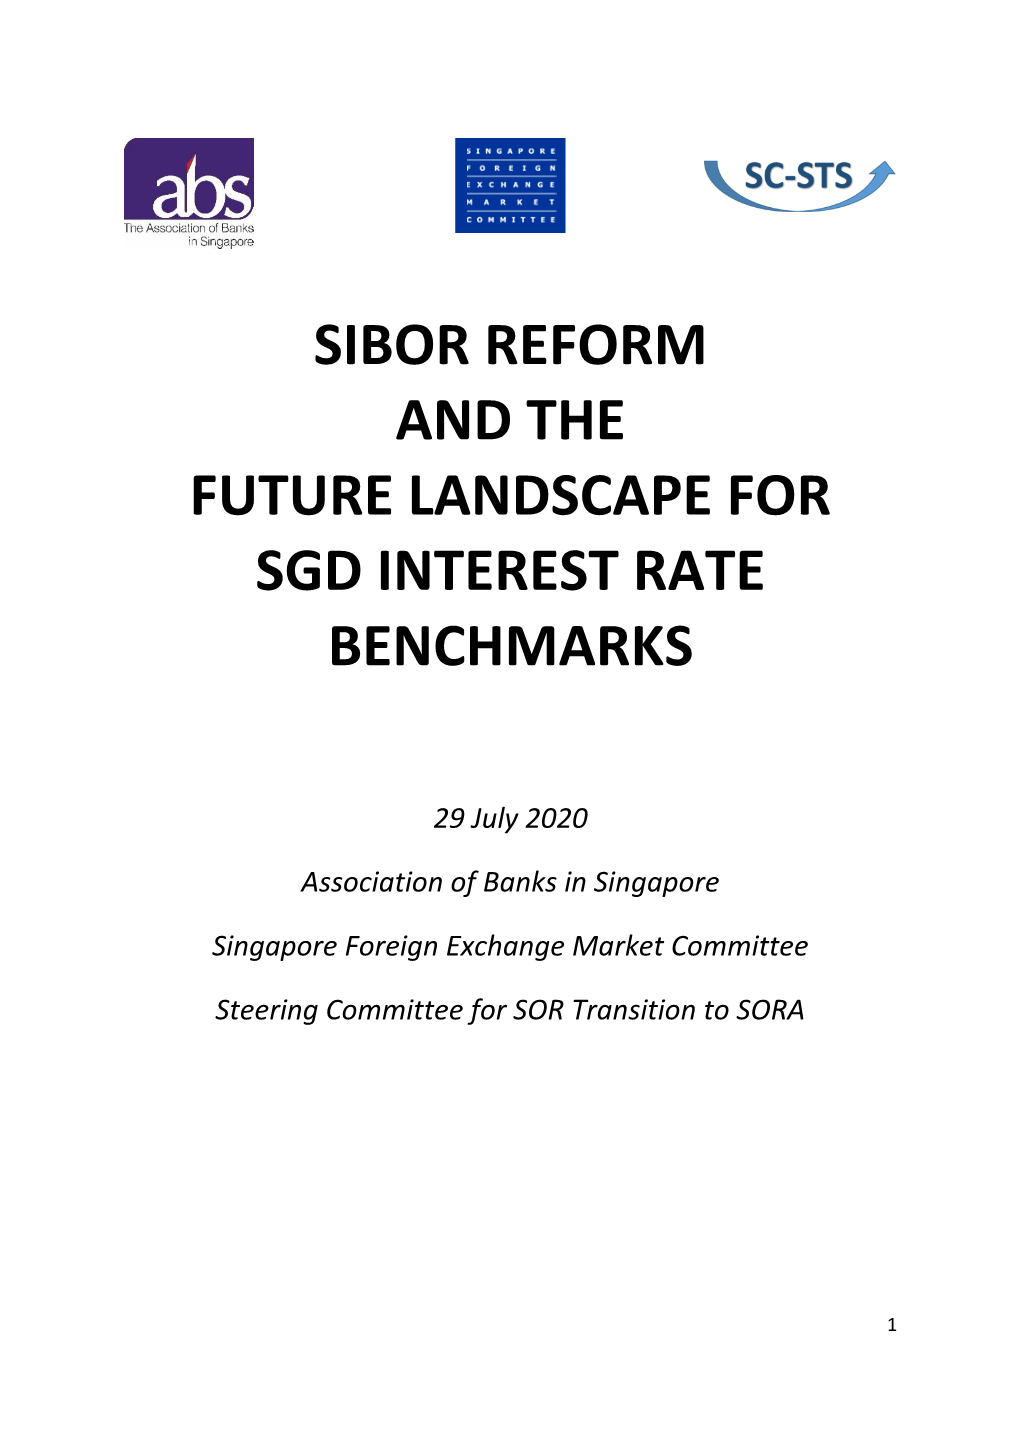 Sibor Reform and the Future Landscape for Sgd Interest Rate Benchmarks